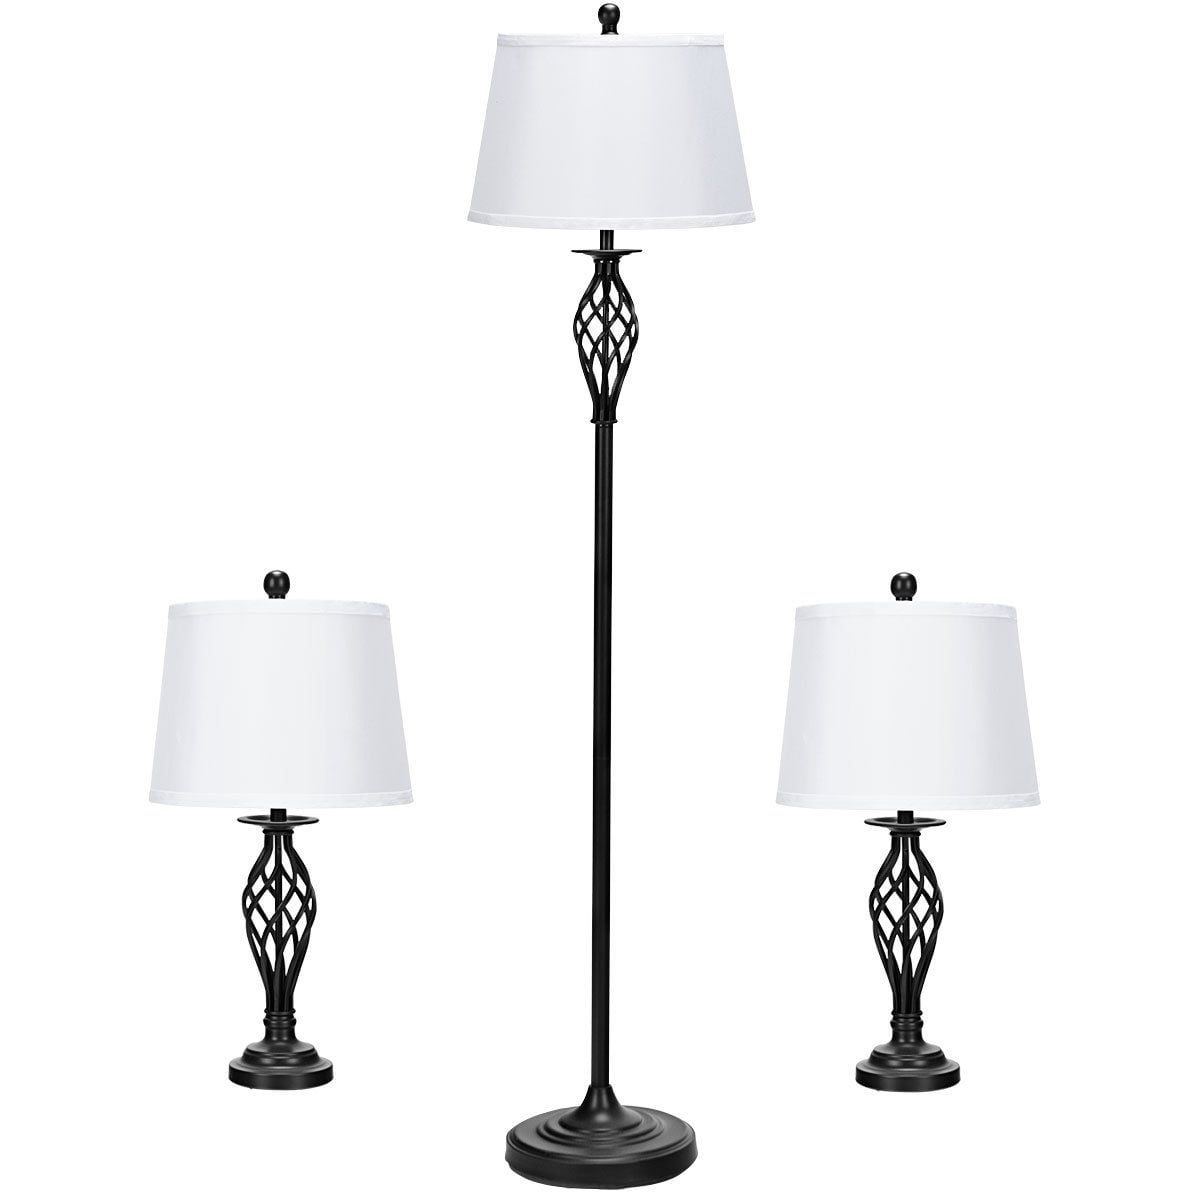 Gymax 3 Piece Lamp Set 2 Table Lamps 1 Floor Lamp Fabric Shades Living Room  Bedroom – Walmart Inside 3 Piece Setfloor Lamps (View 10 of 20)